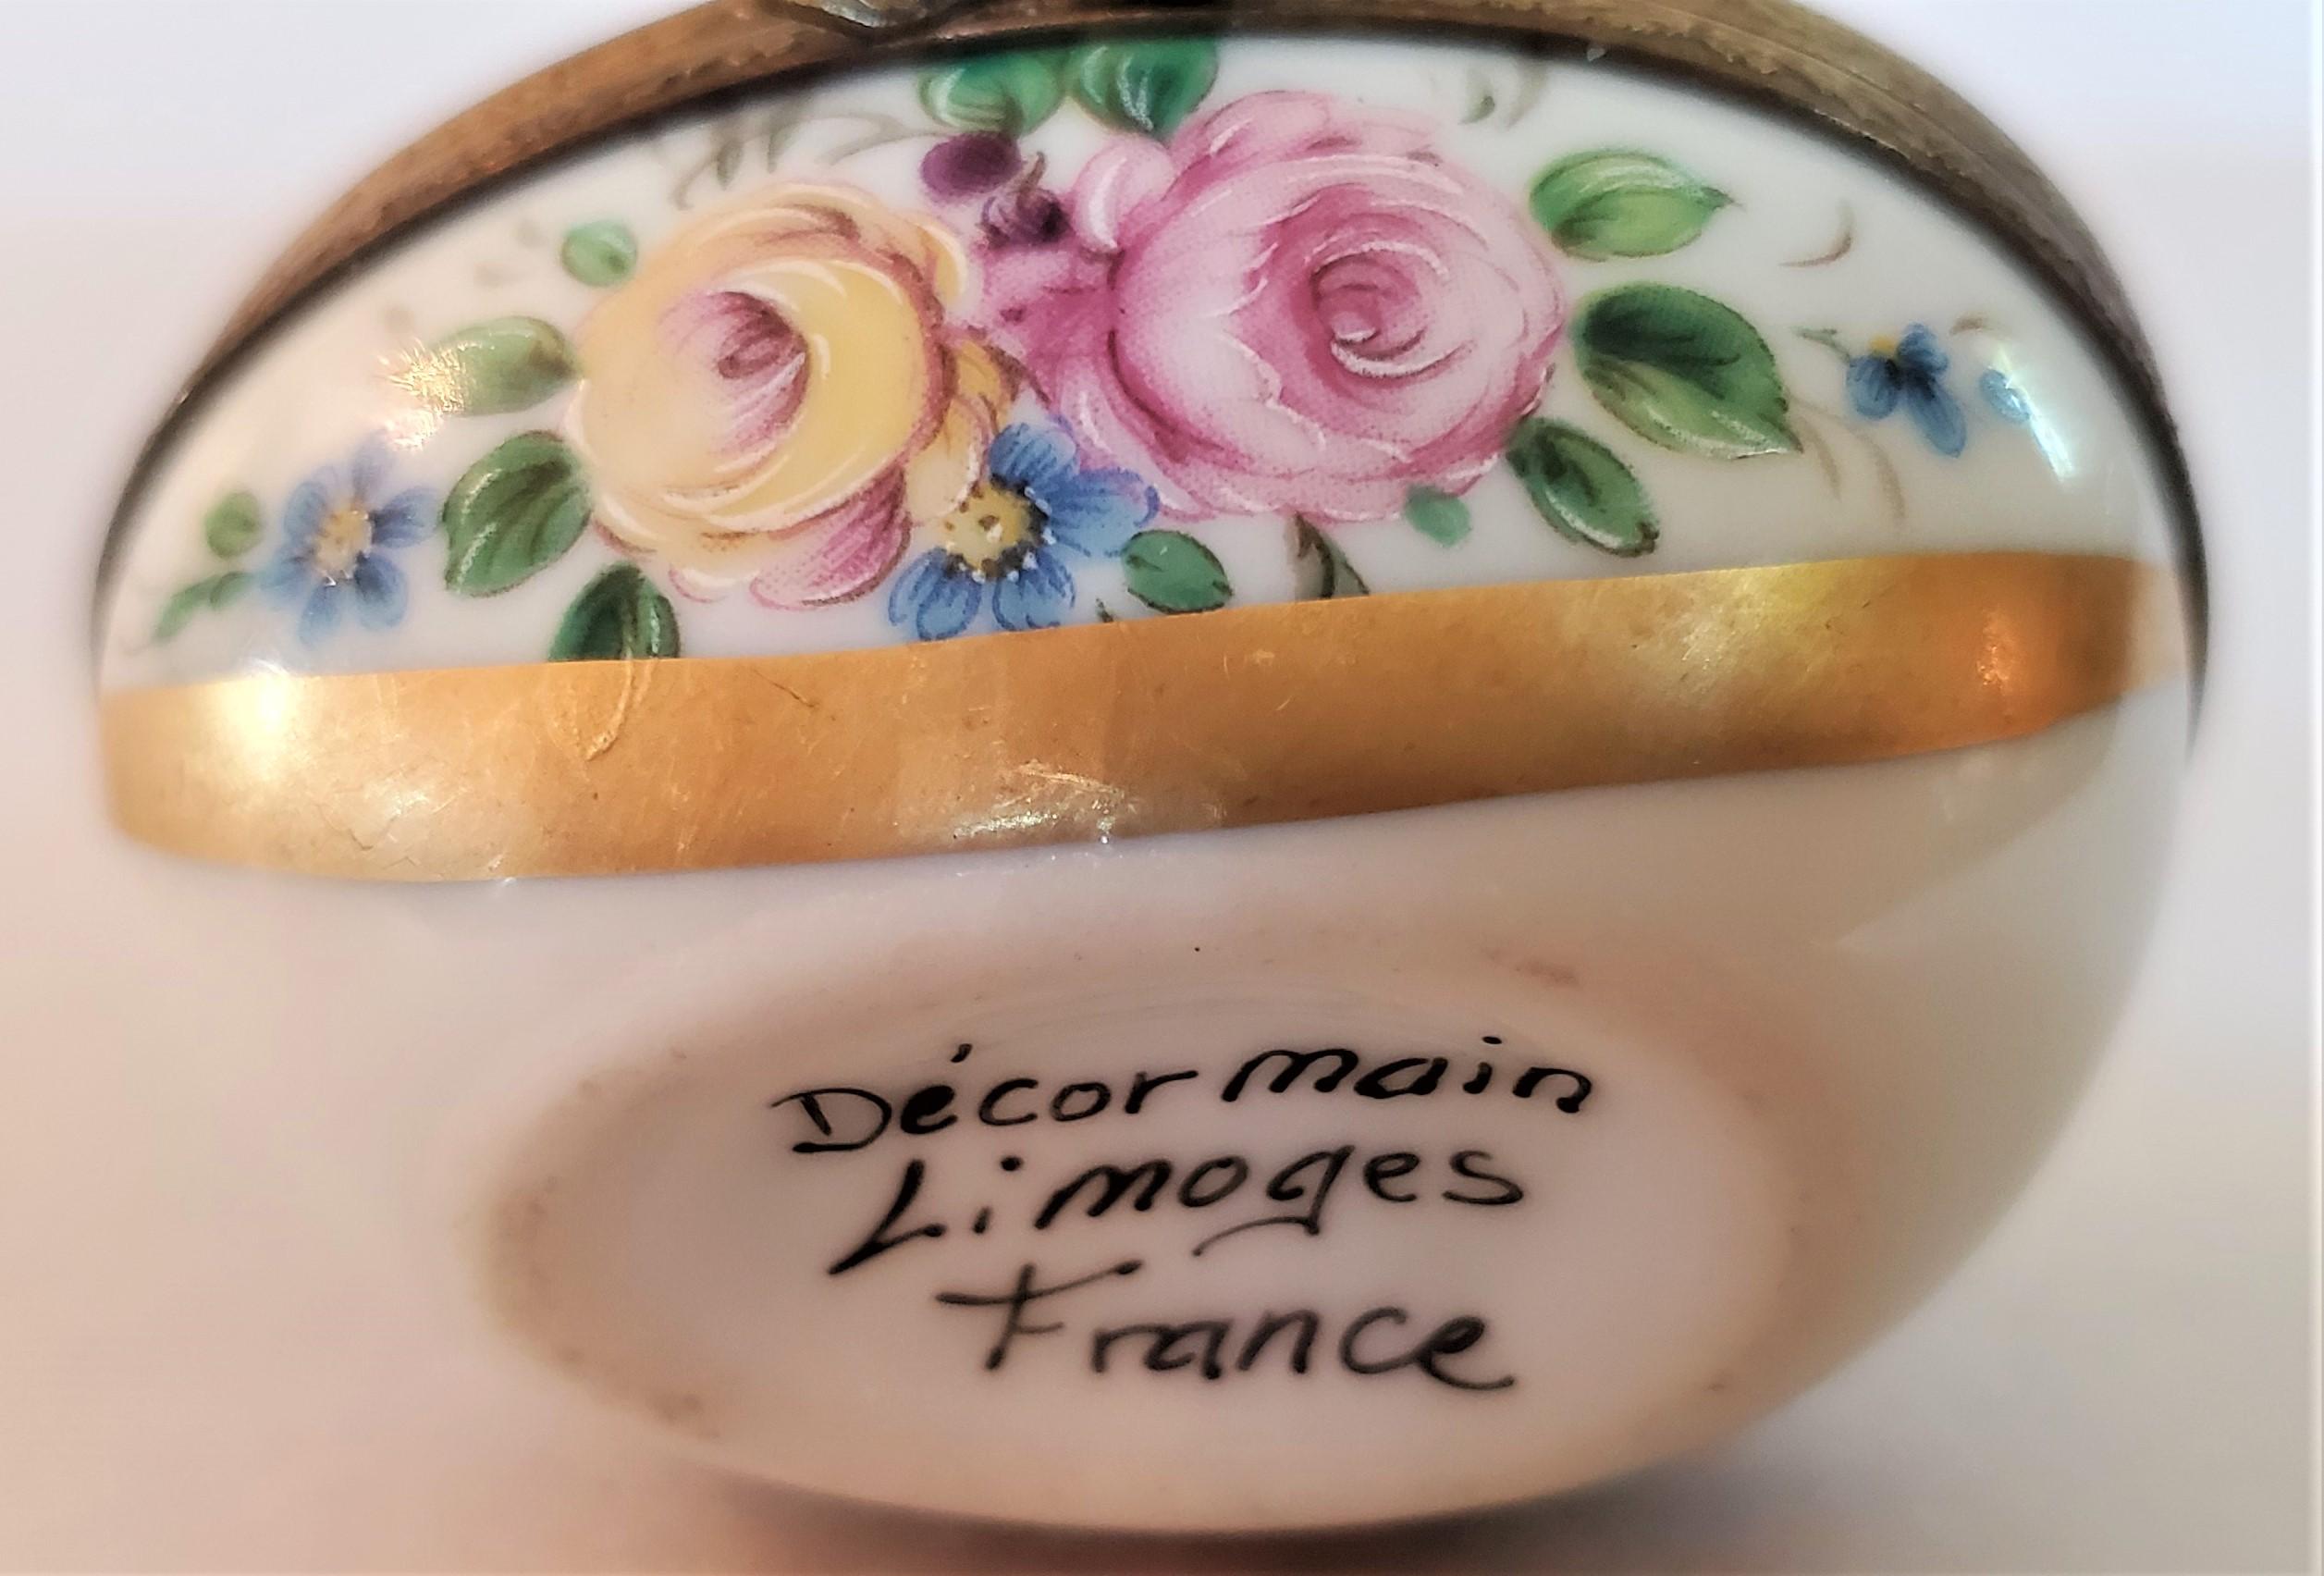 Presenting a lovely and exceptionally cute vintage Limoges egg ring box.

Made in Limoges, France, circa 1920-1930.

Marked on base as “Decor Main Limoges France”.

‘Decor Main’ meaning hand decorated.

Beautiful pink and yellow rose